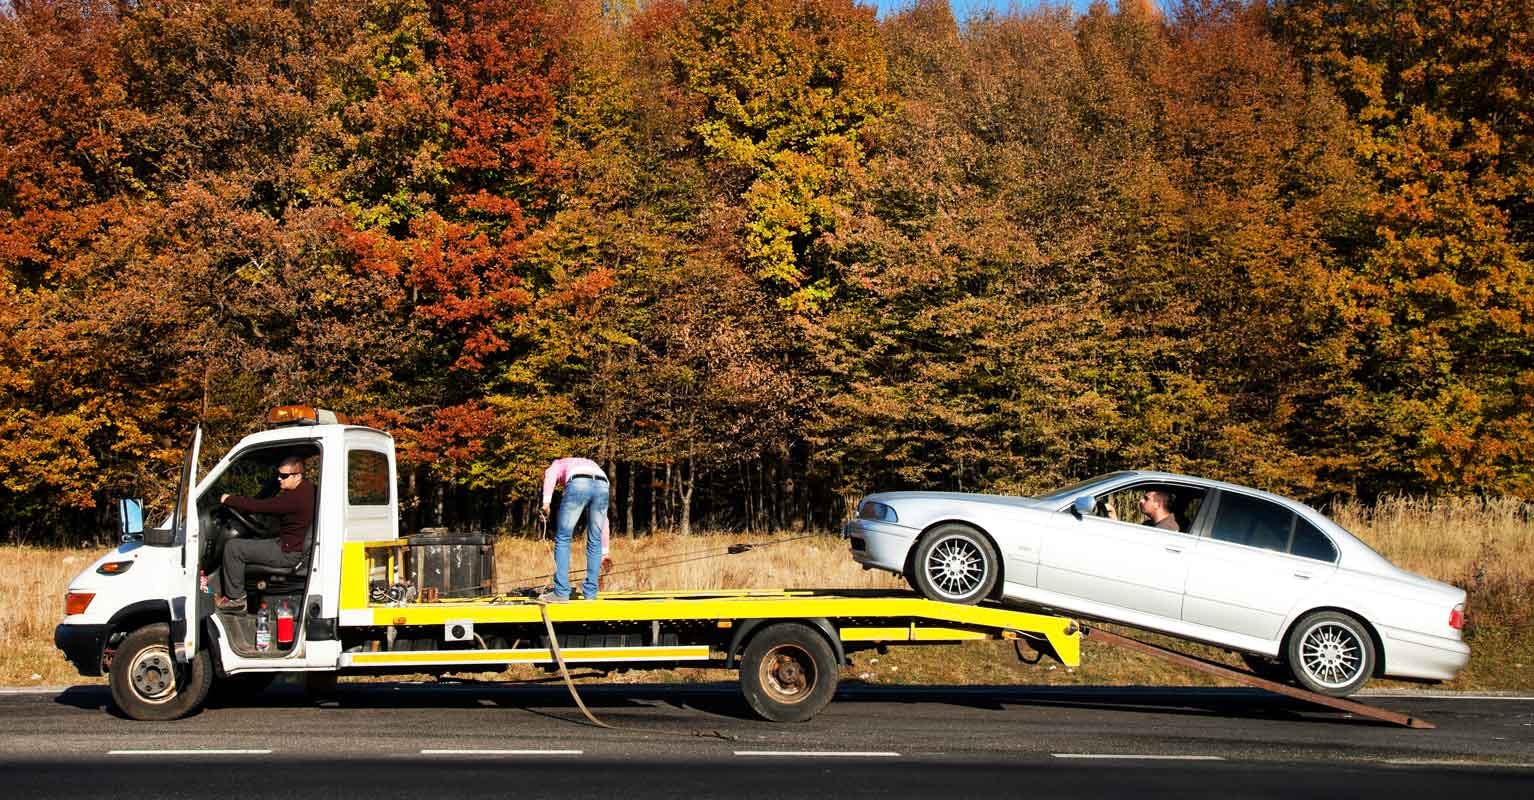 Car being loaded onto a flatbed tow truck